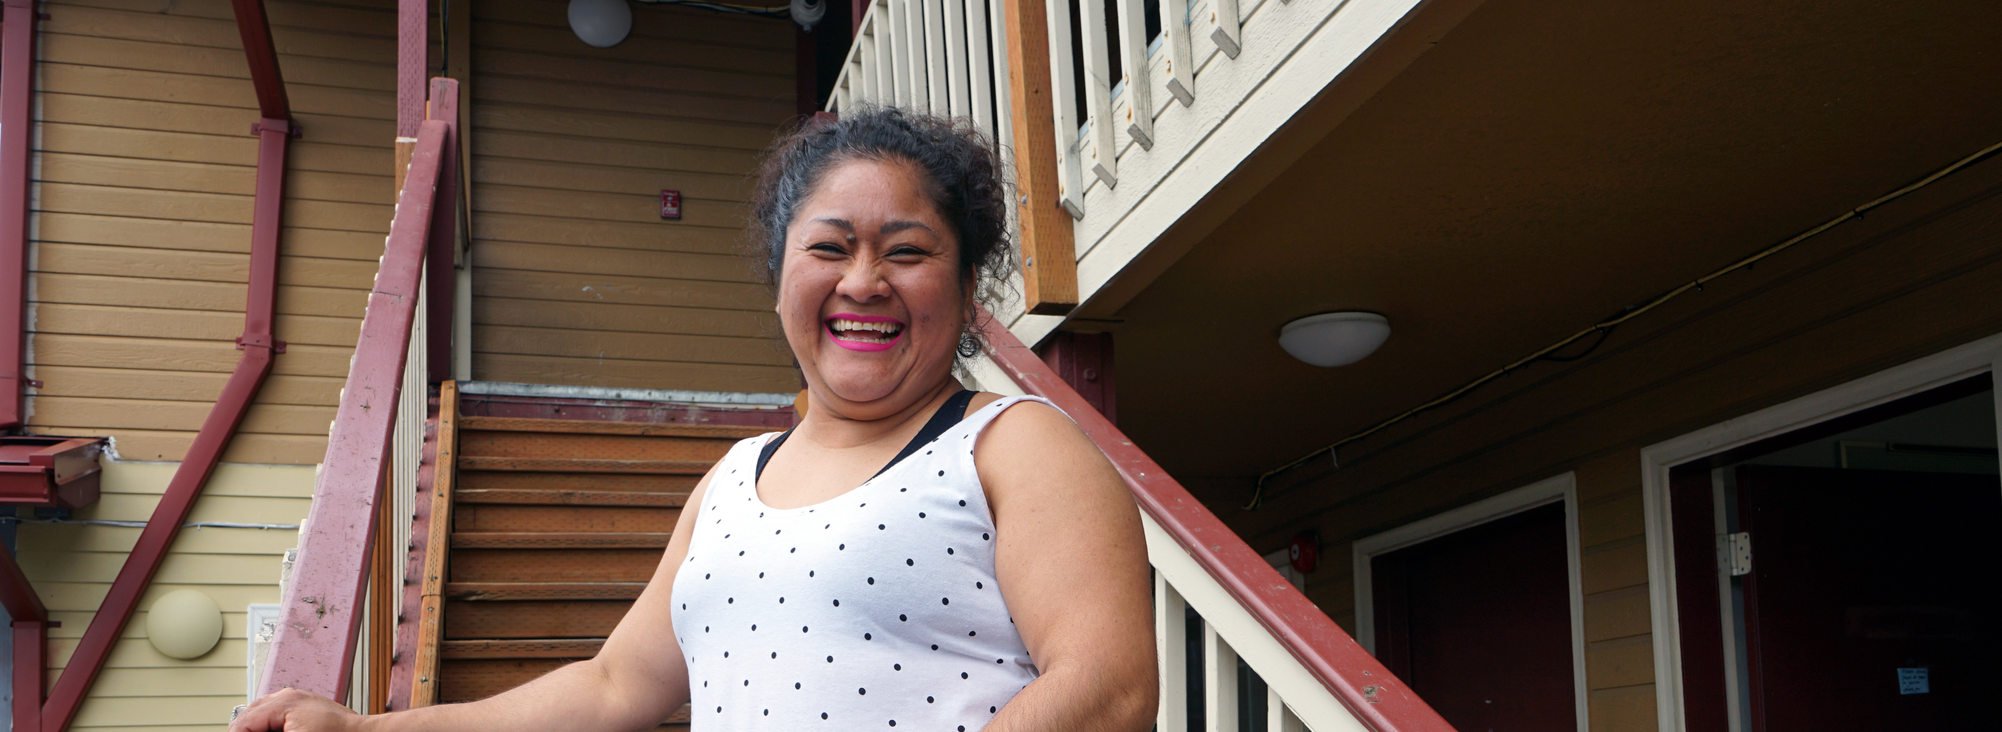 Latina woman in white polka dot tank top and black pants smiling and standing at foot of exterior stairs